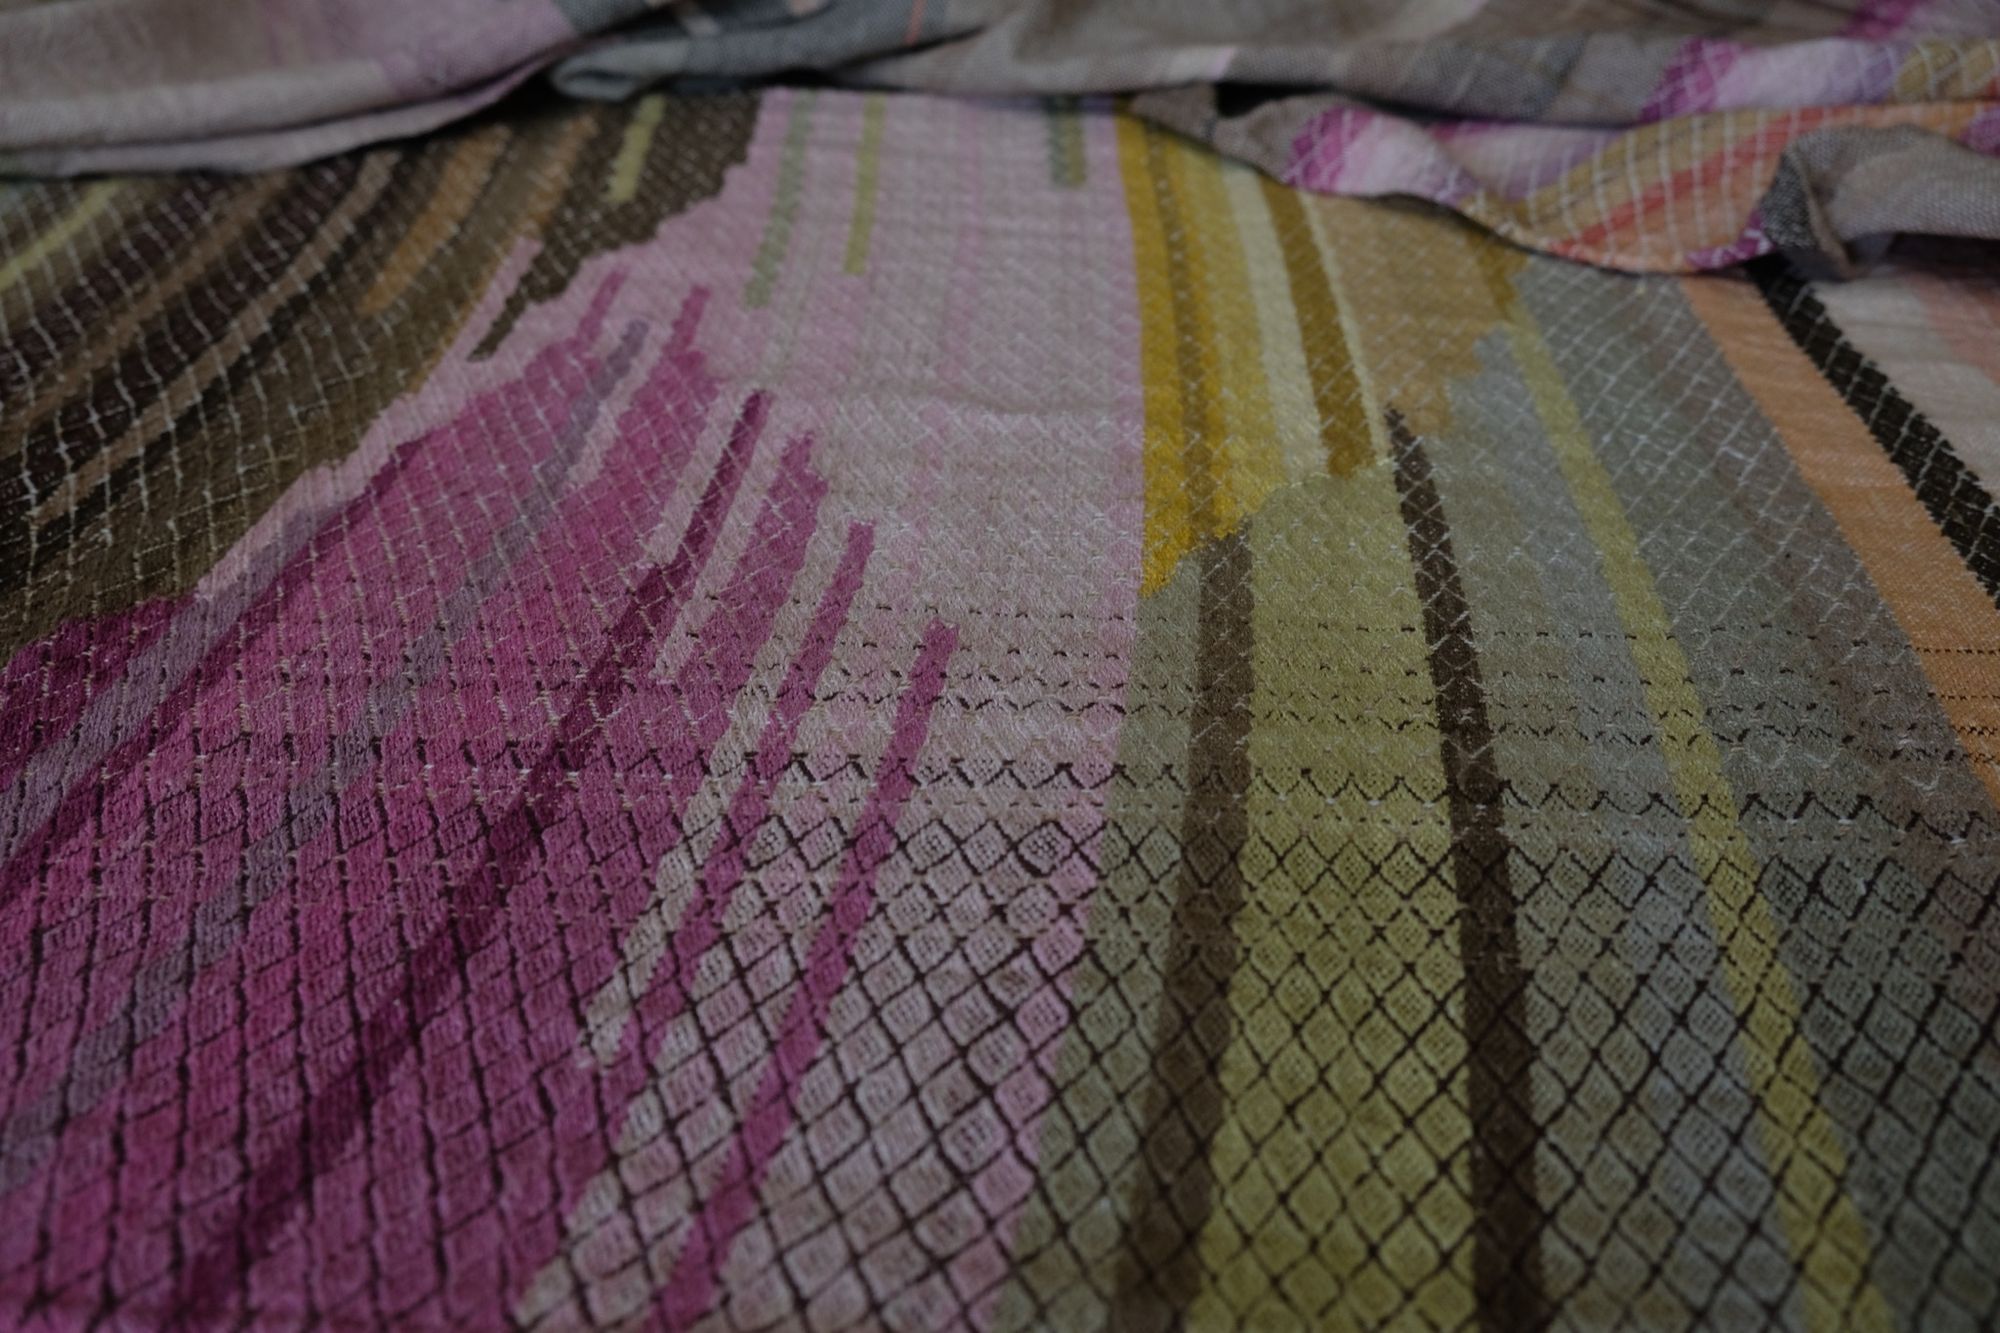 Detail of handwoven highly textured diamond pattern raw silk fabric in pink, yellow, green, brown and black